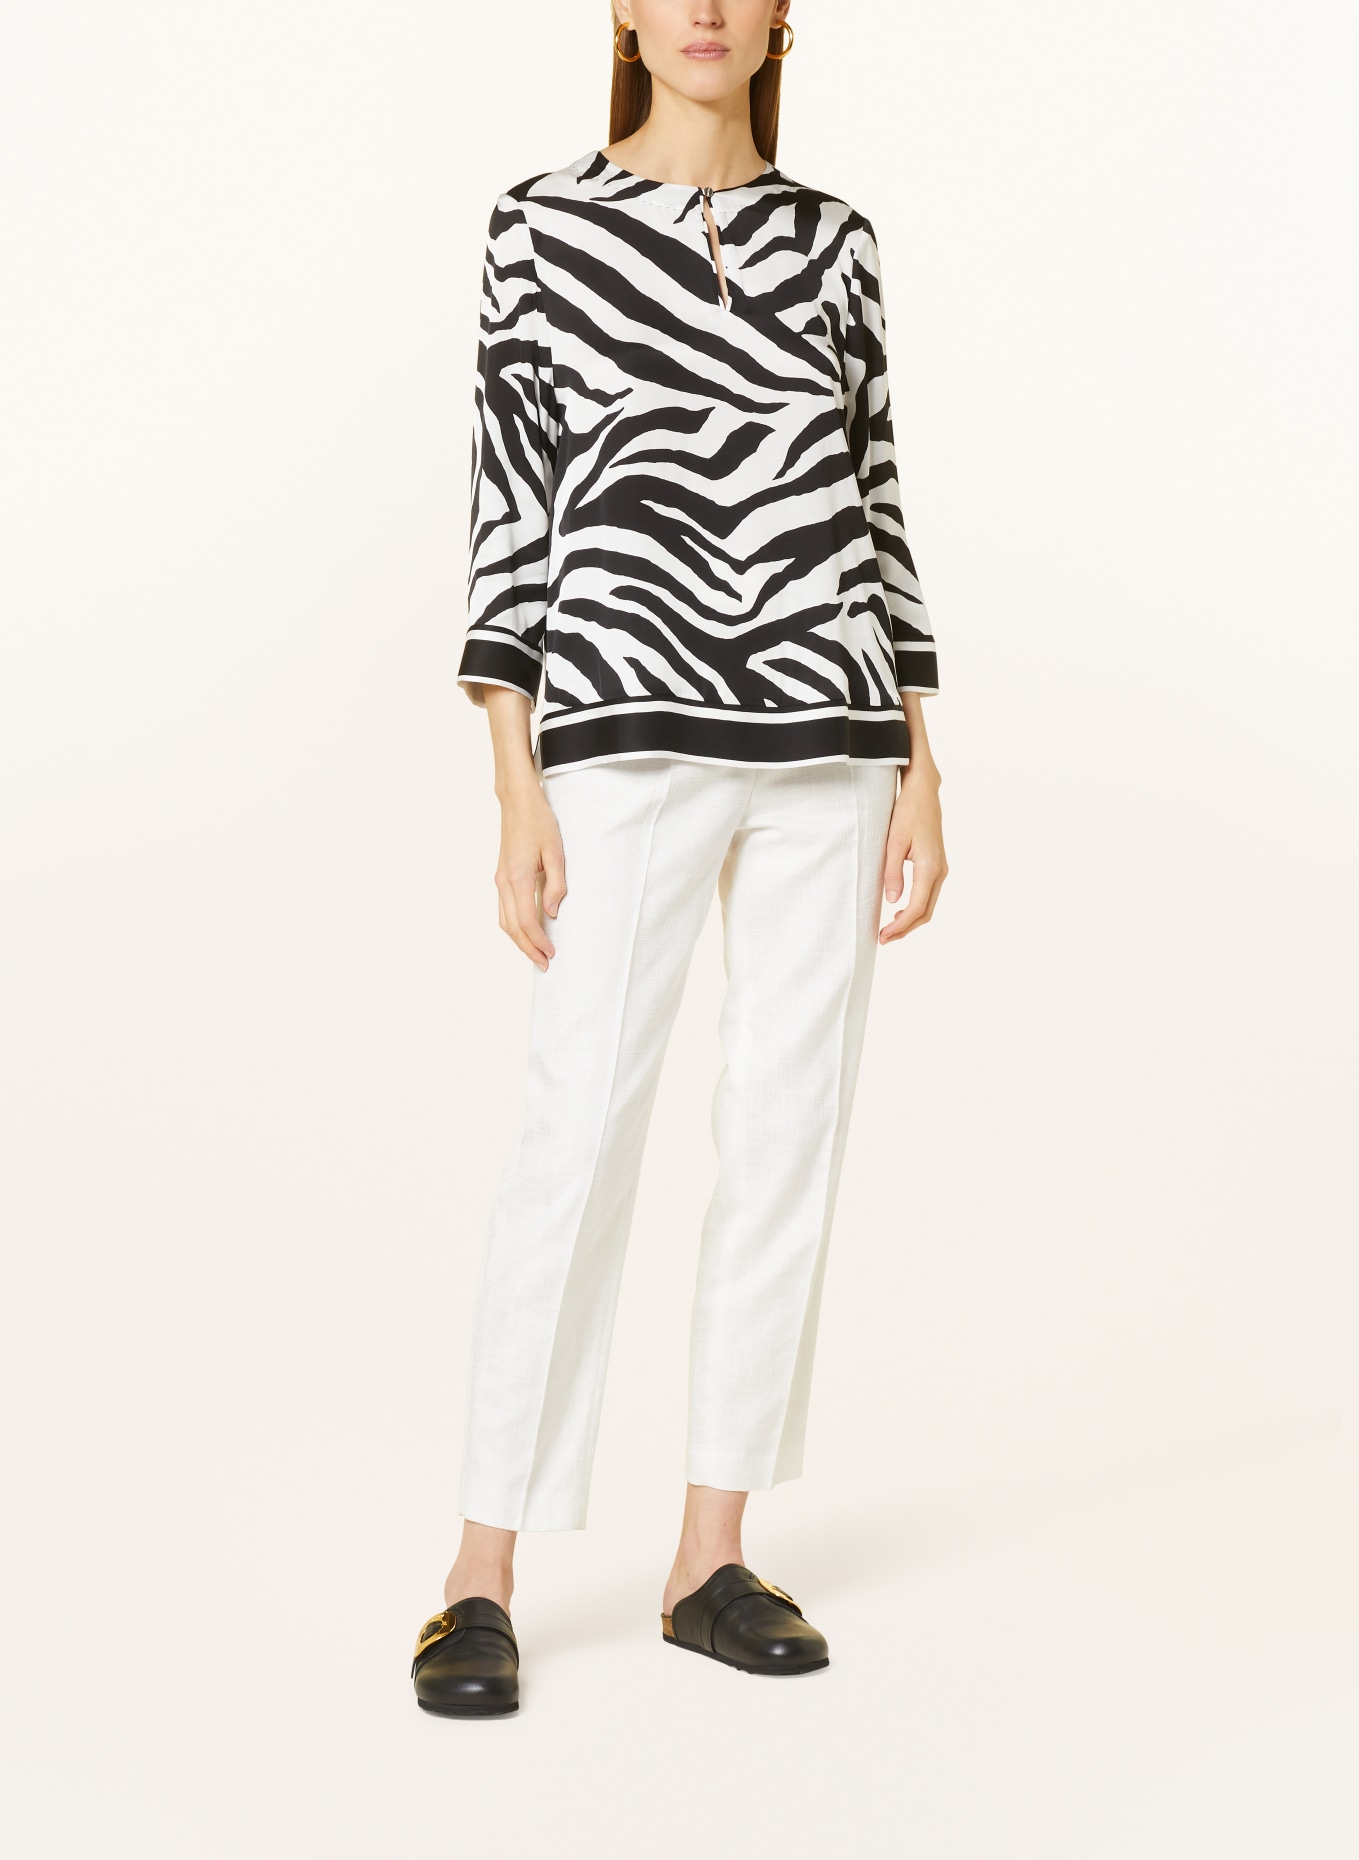 MARC CAIN Shirt blouse made of satin with 3/4 sleeves, Color: 190 white and black (Image 2)